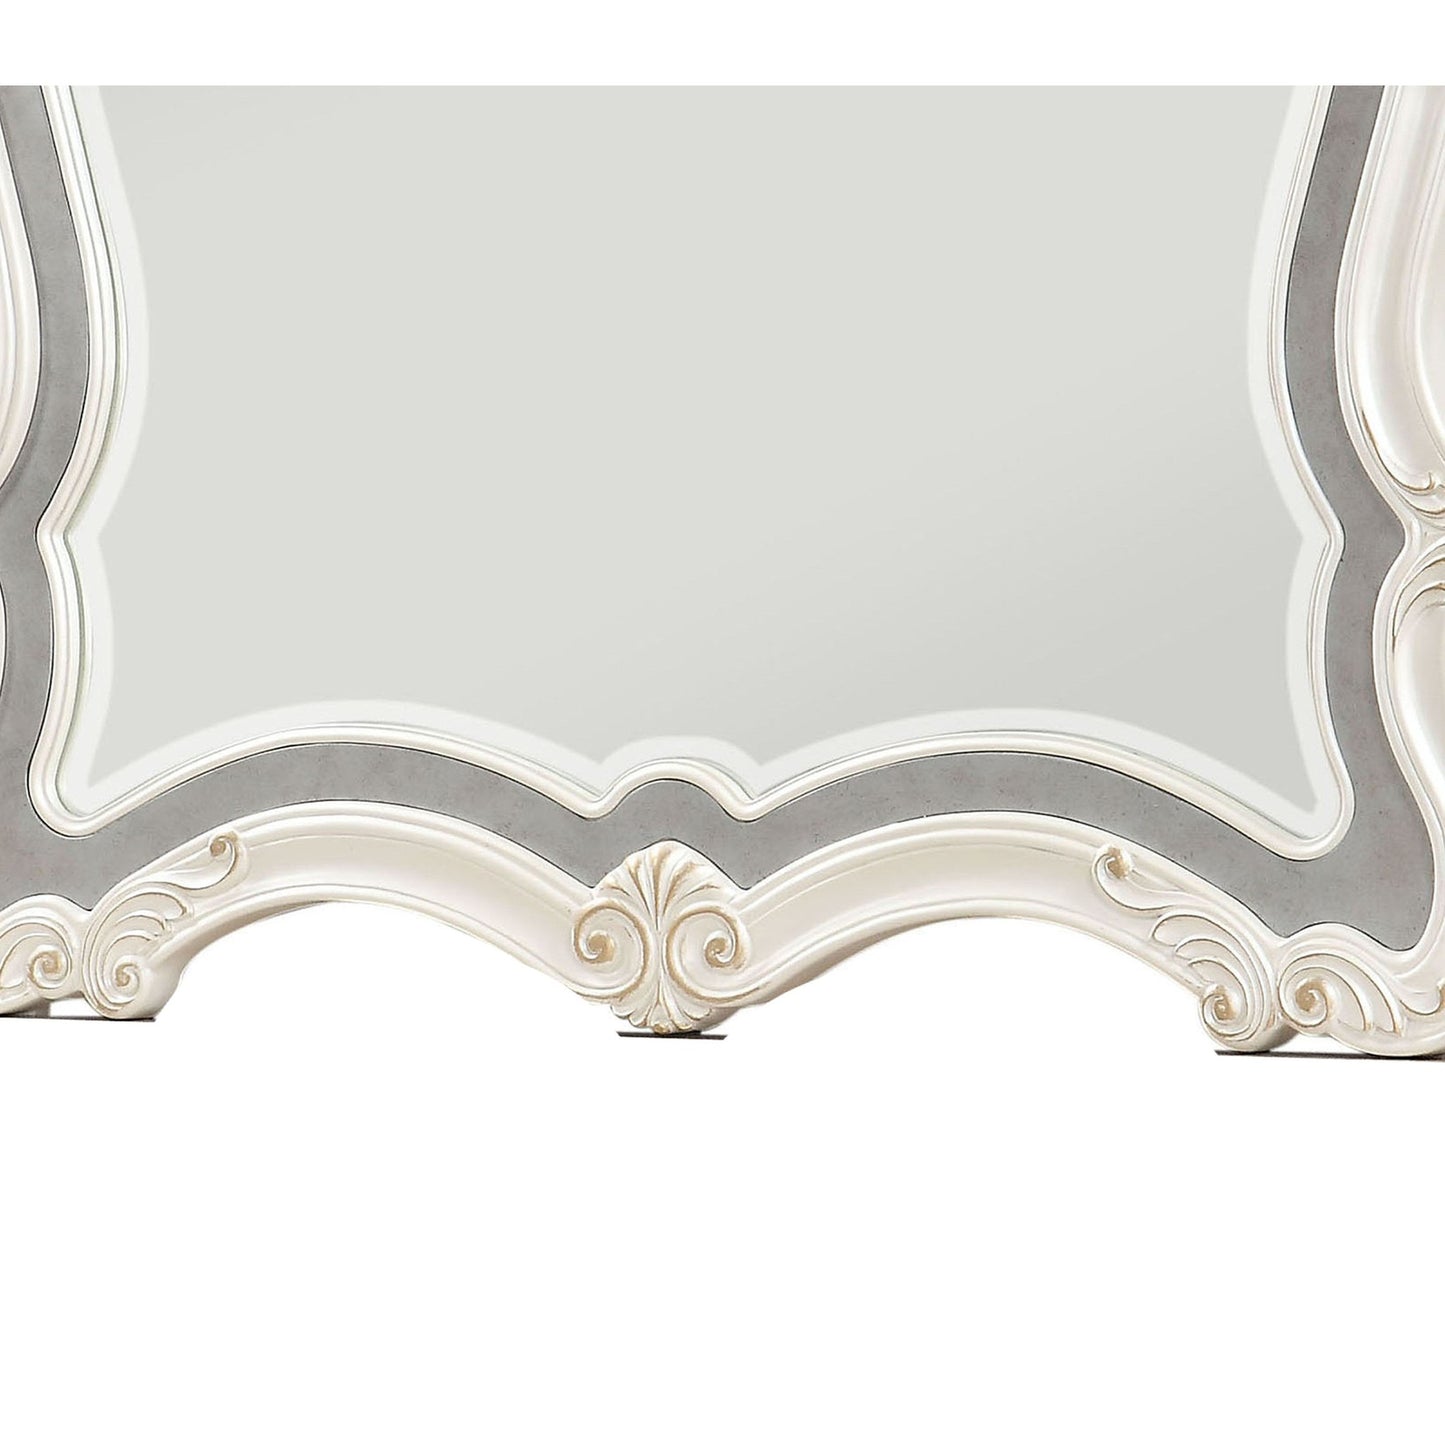 Benzara White and Silver Traditional Wooden Scrollwork Crown Mirror